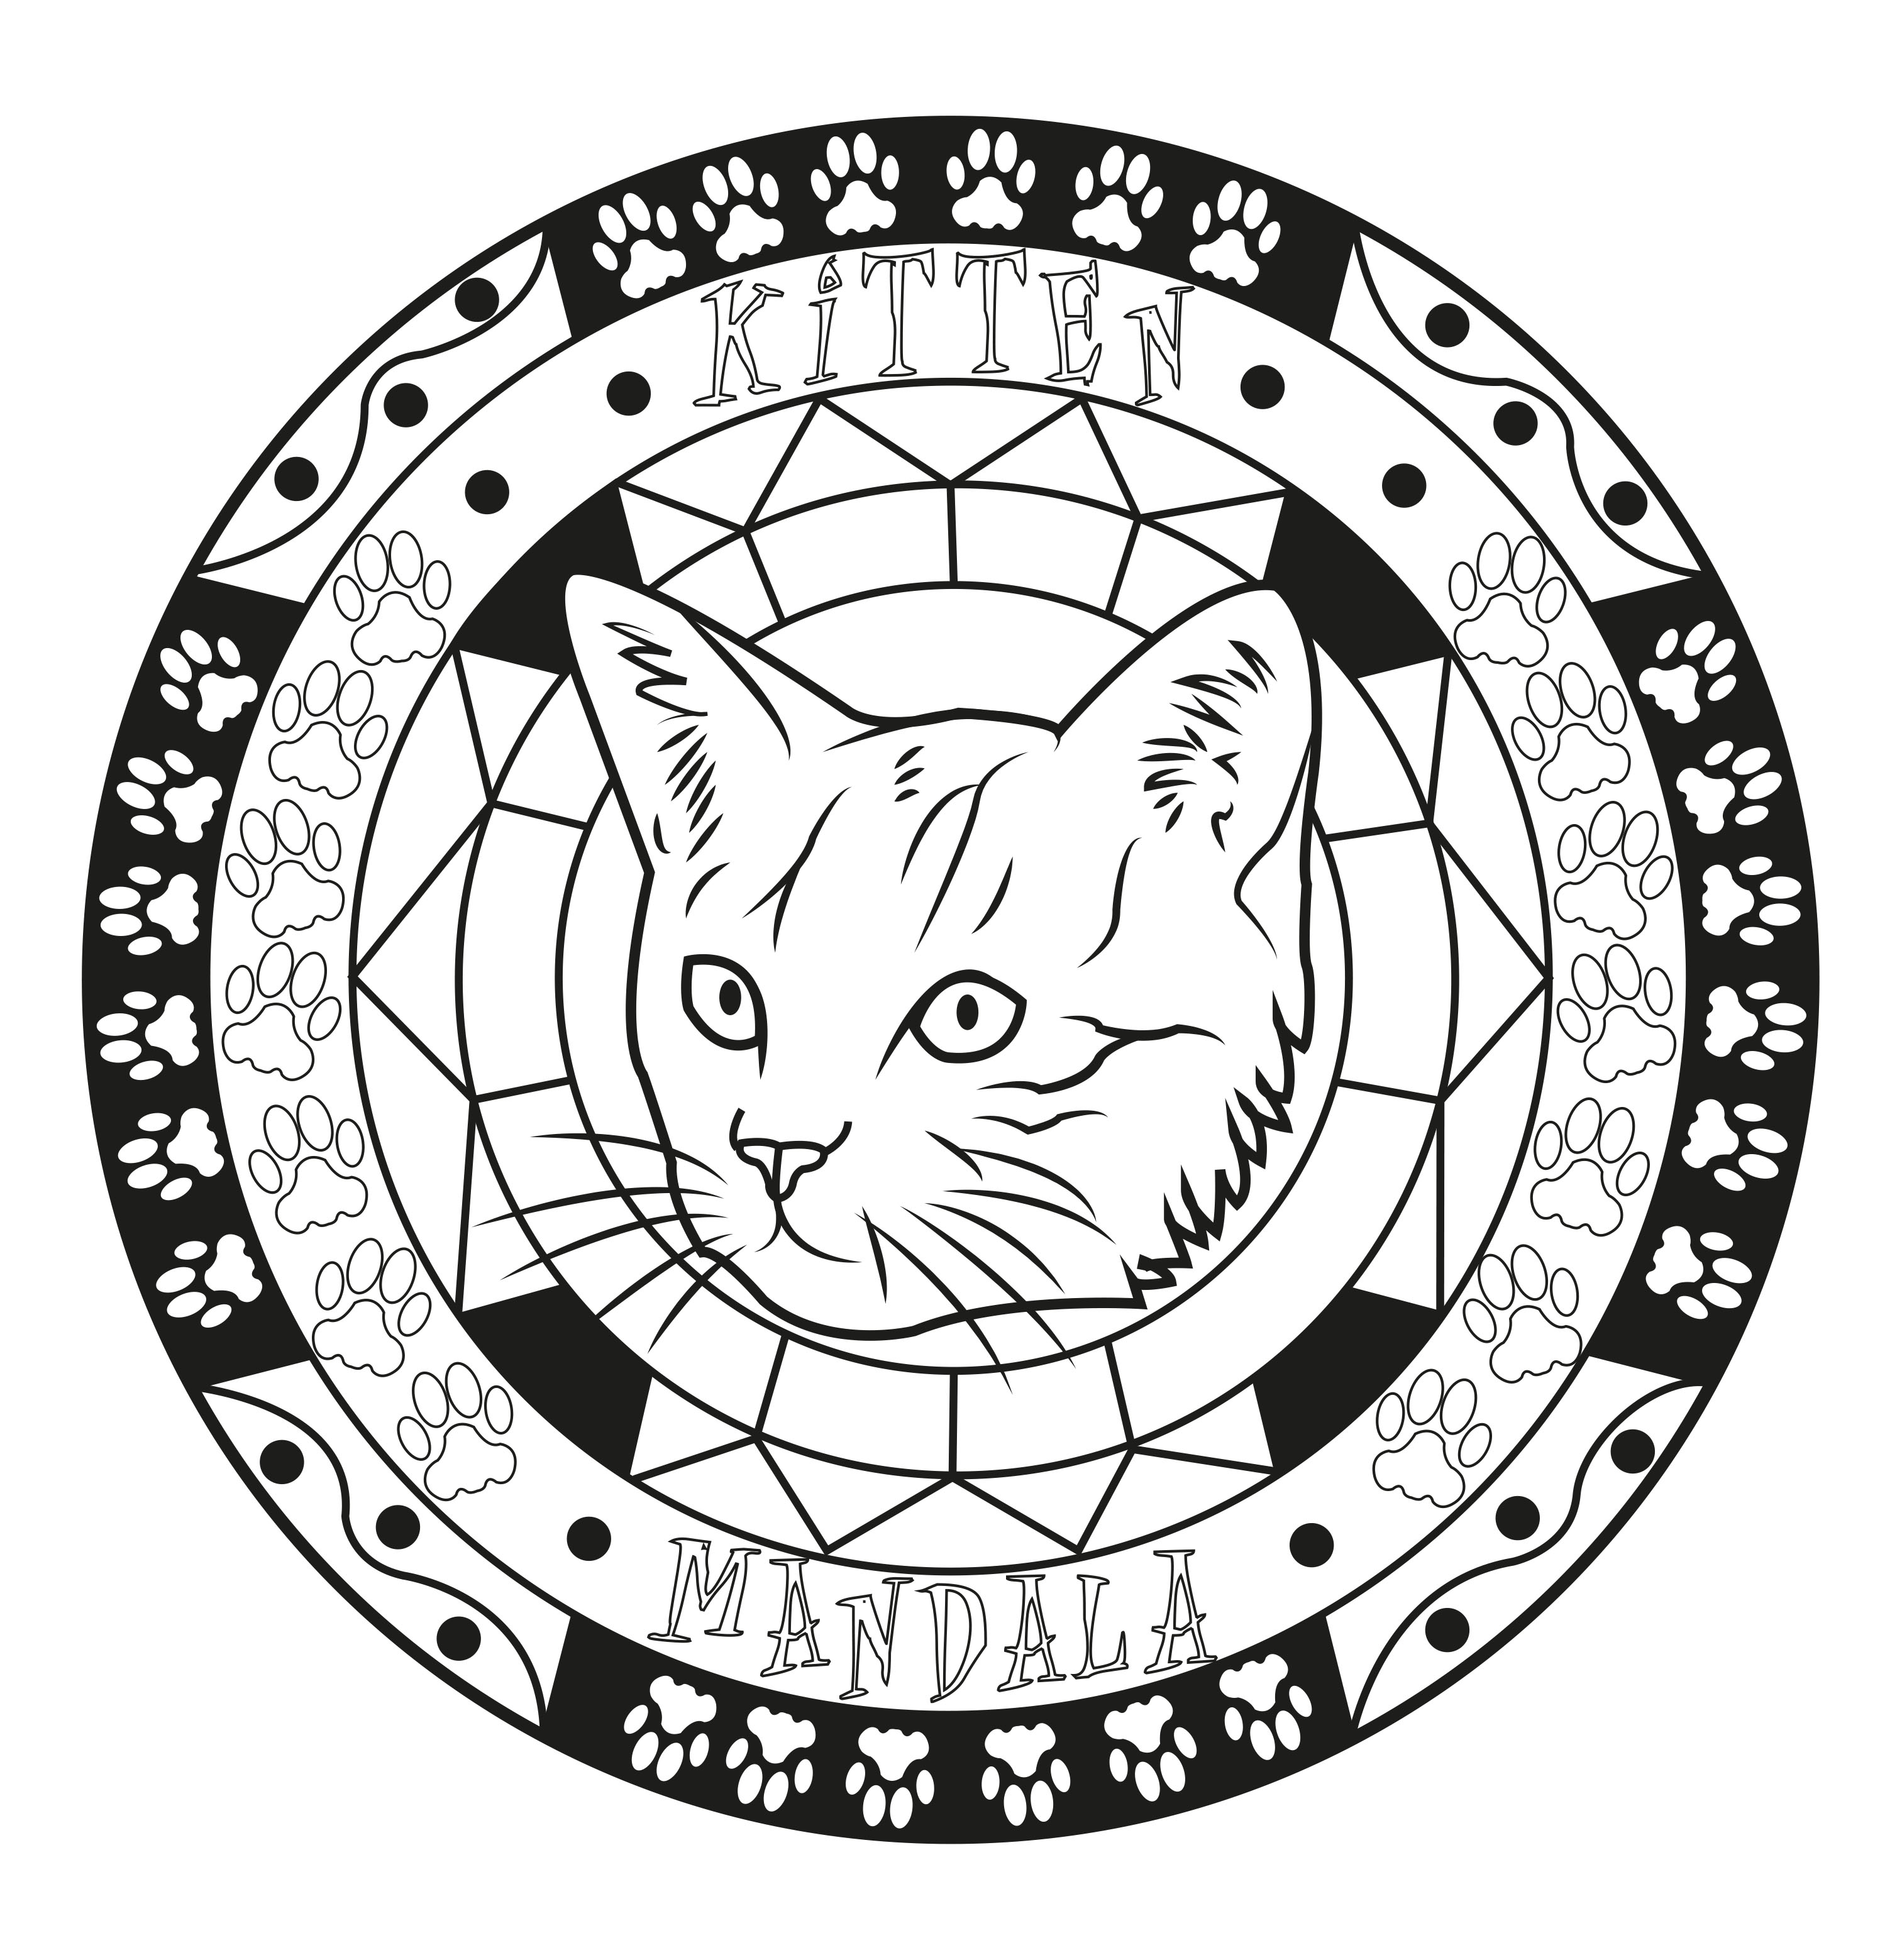 Mandala coloring page on the cat's theme, Artist : Allan